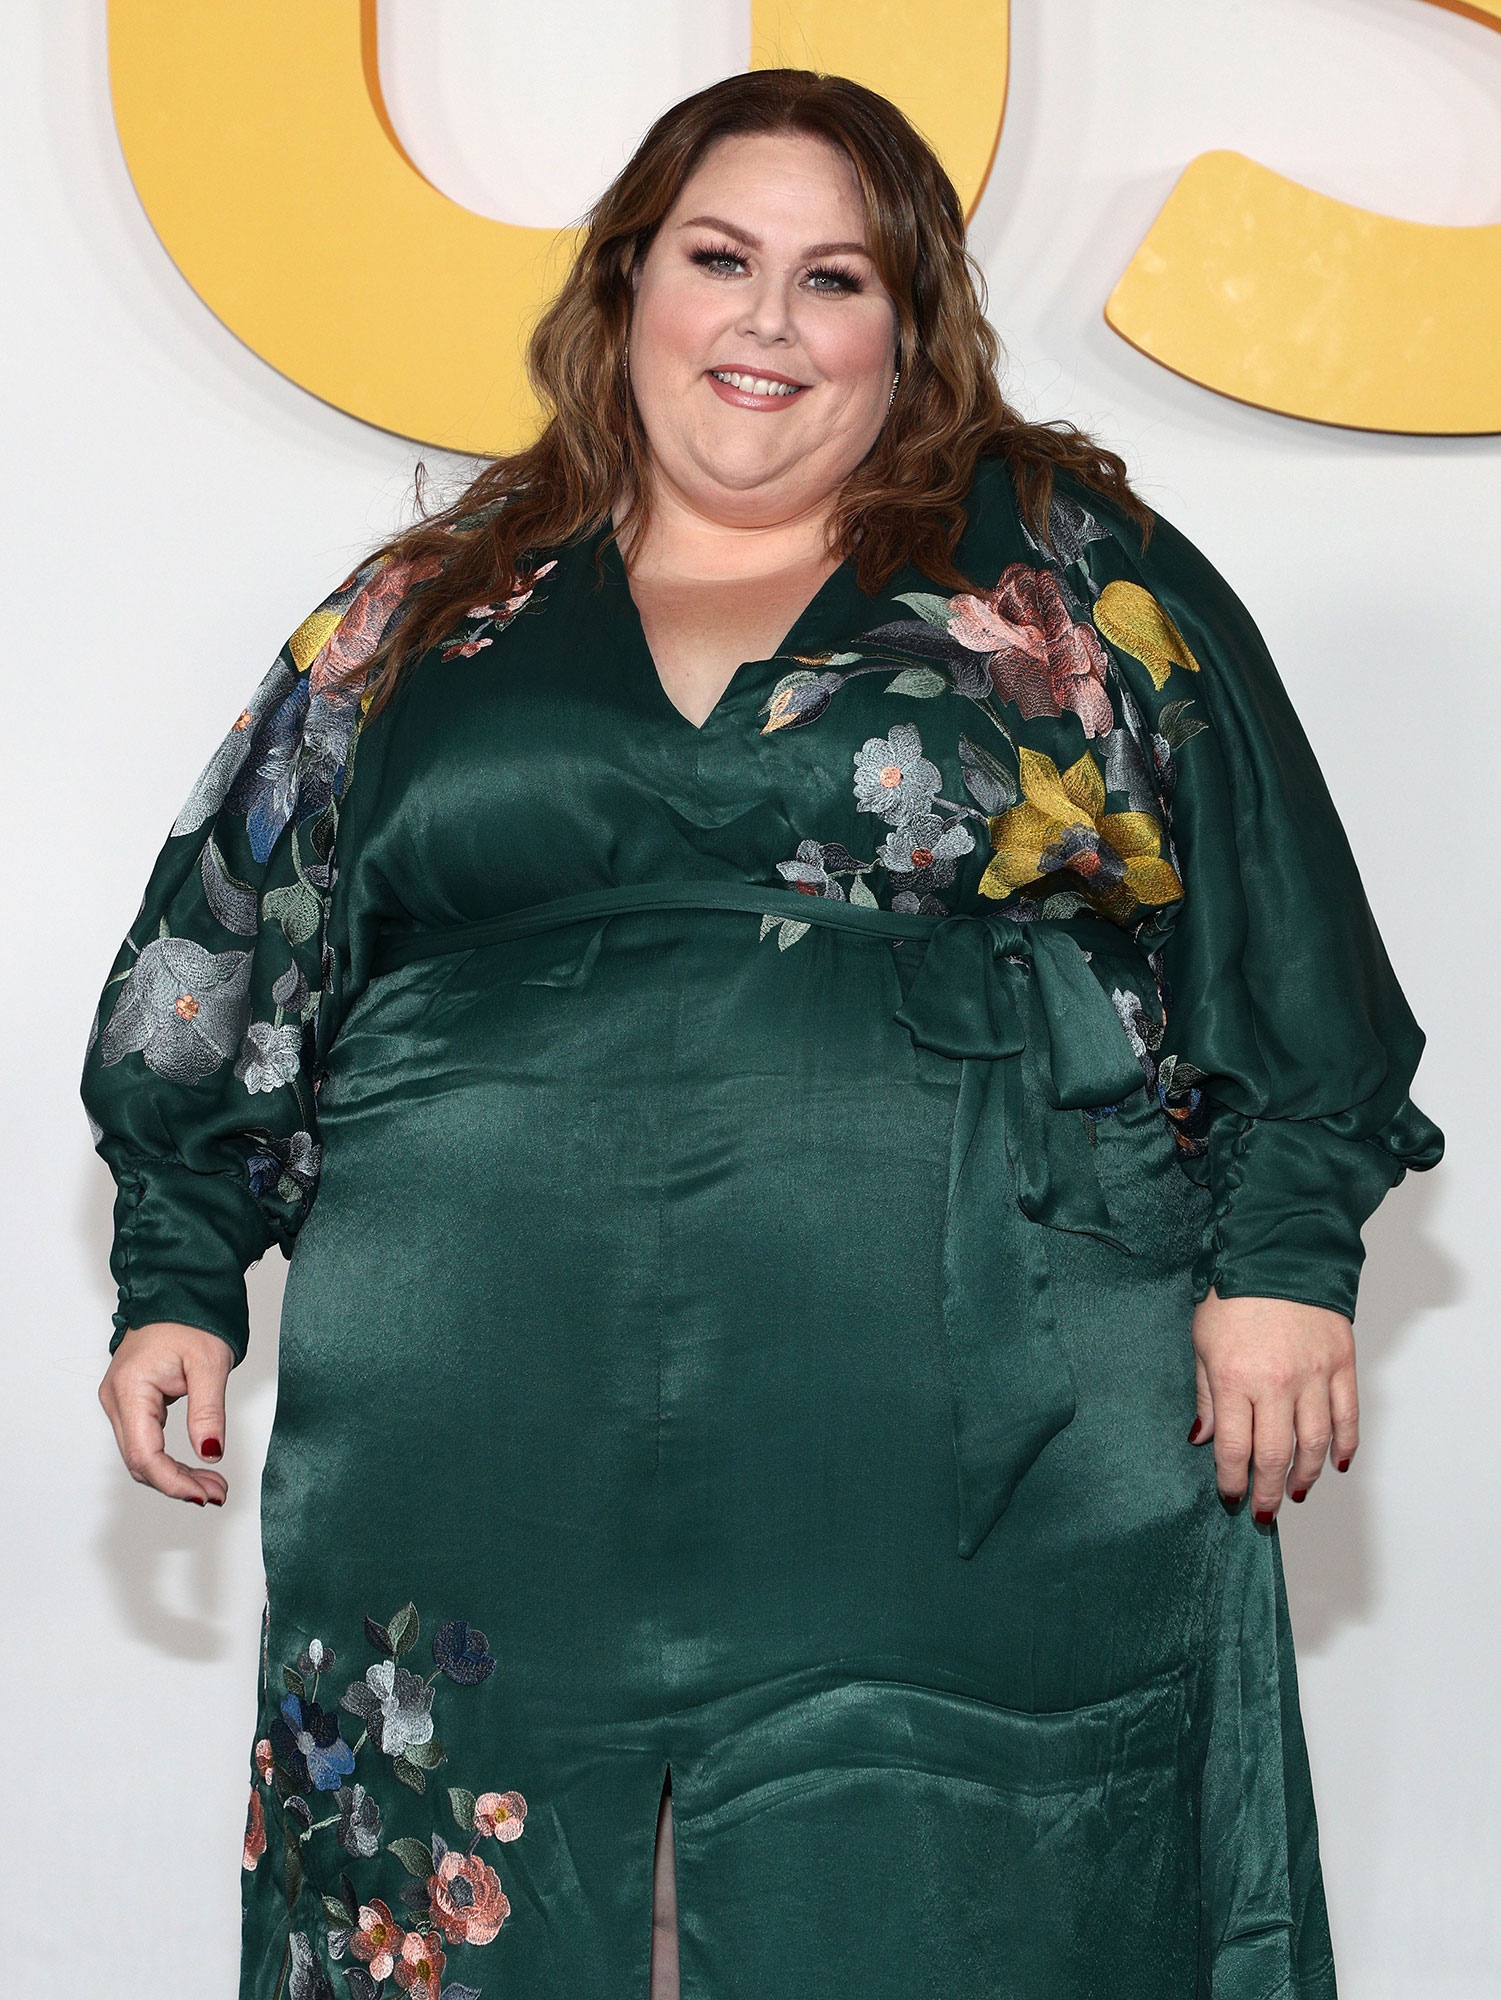 Chrissy Metz This Is Us Fans Tell Me